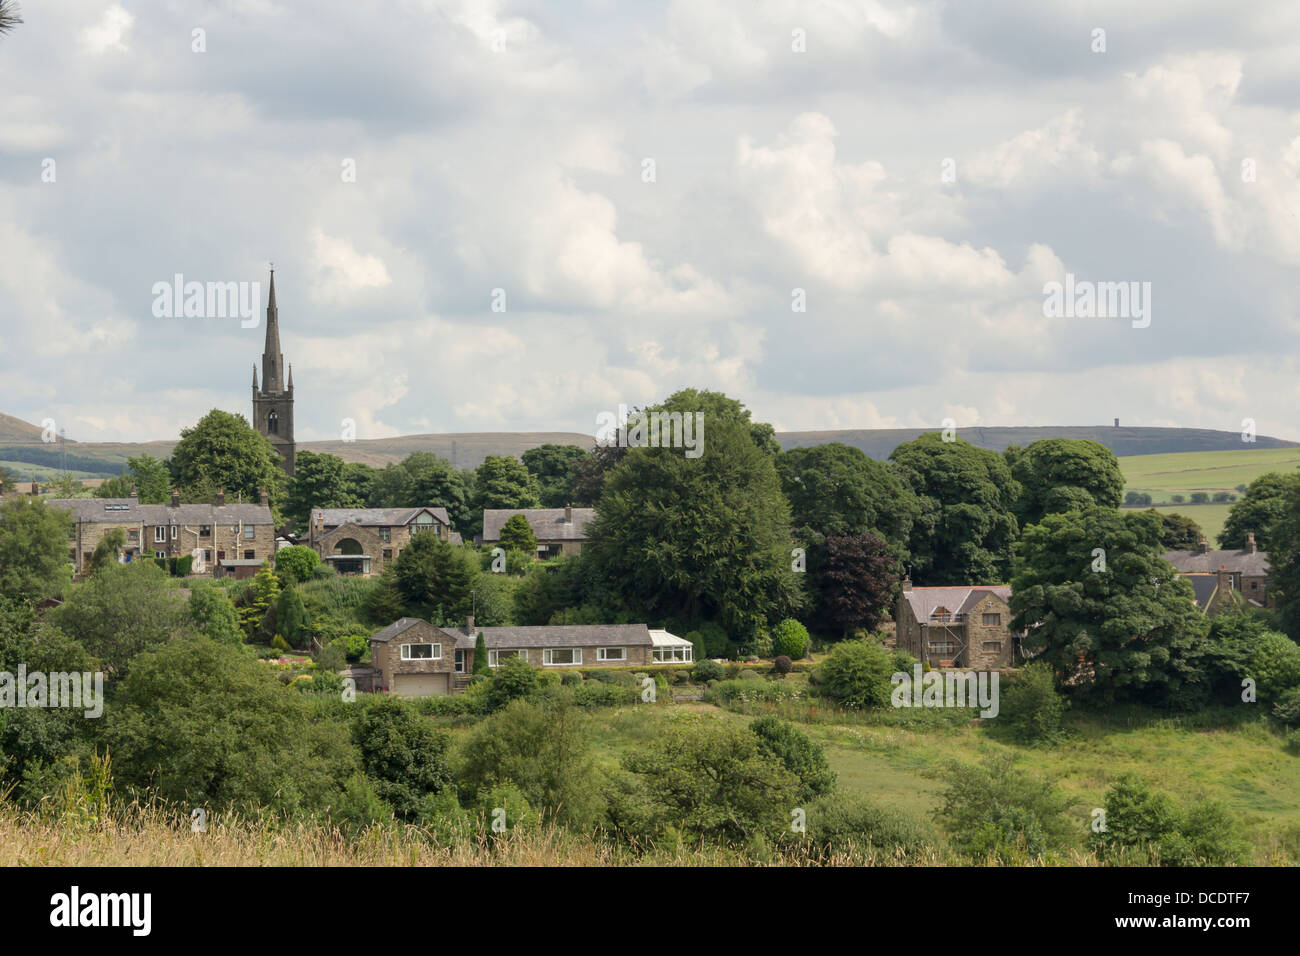 The village of Chapeltown near Bolton in Lancashire with the spire of St. Anne's Church. Beyond the village lies Holcombe Moor. Stock Photo